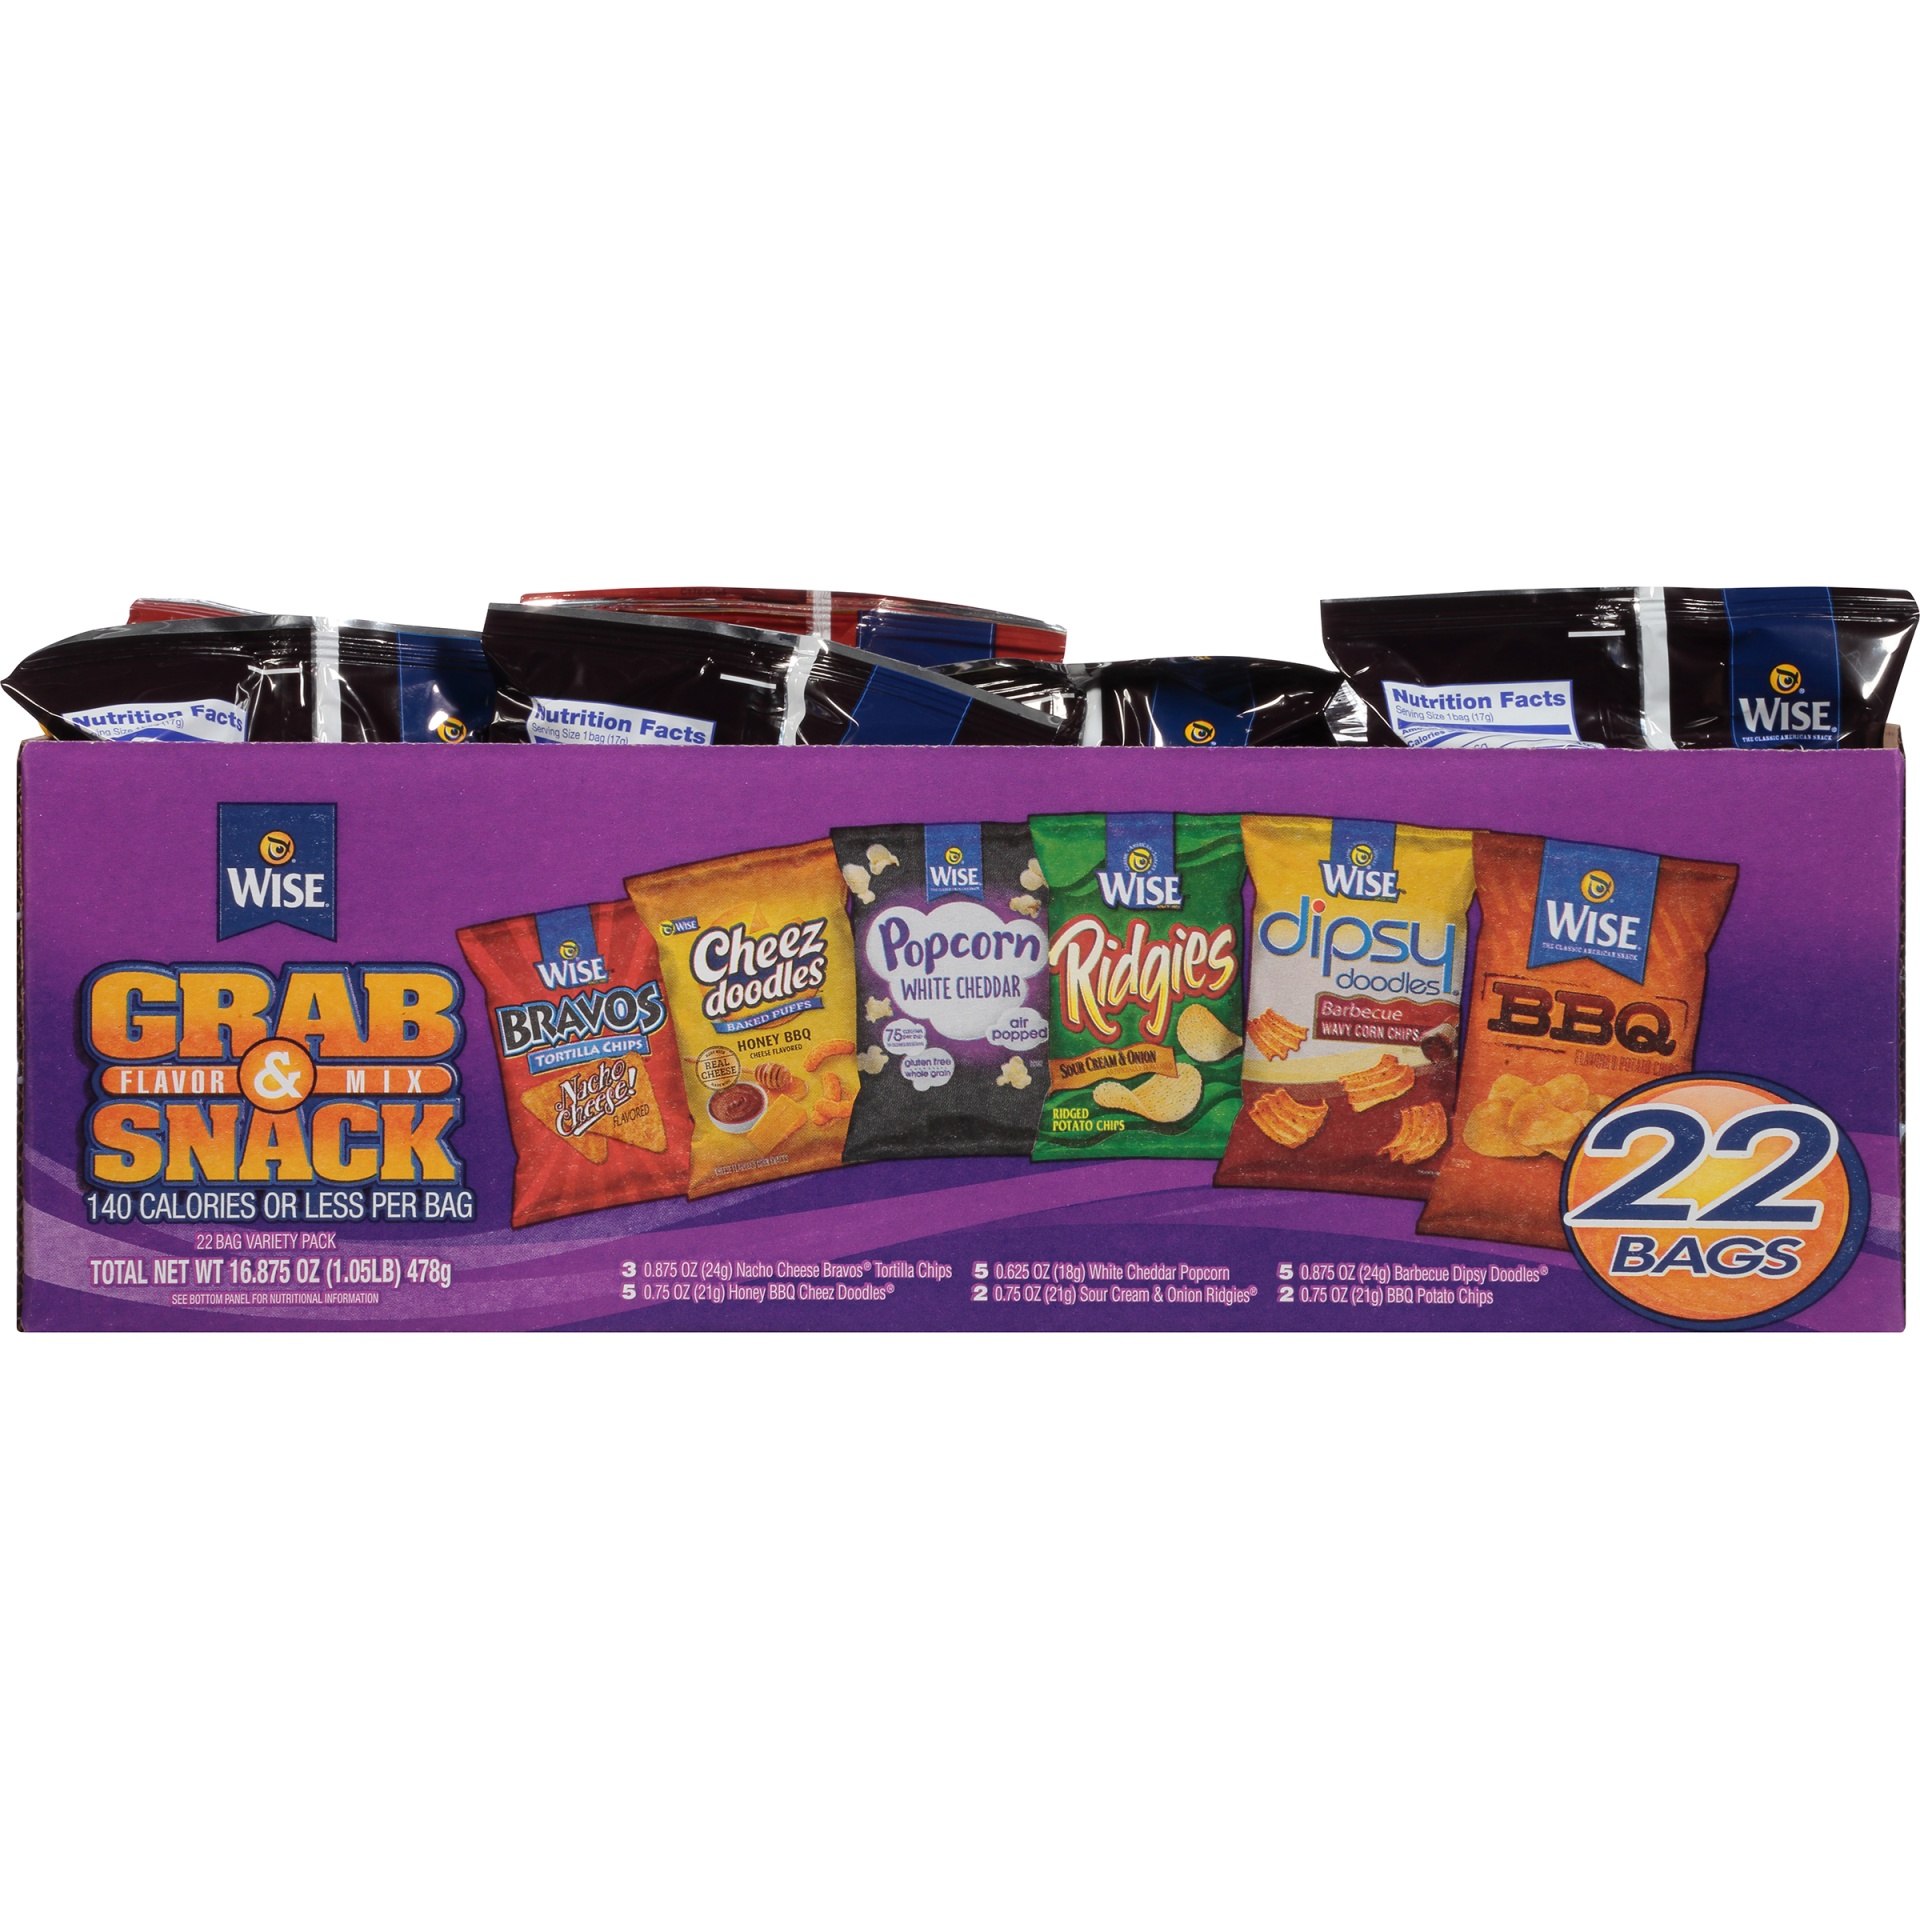 slide 6 of 8, Wise Grab & Snack Flavor Mix, 22 ct